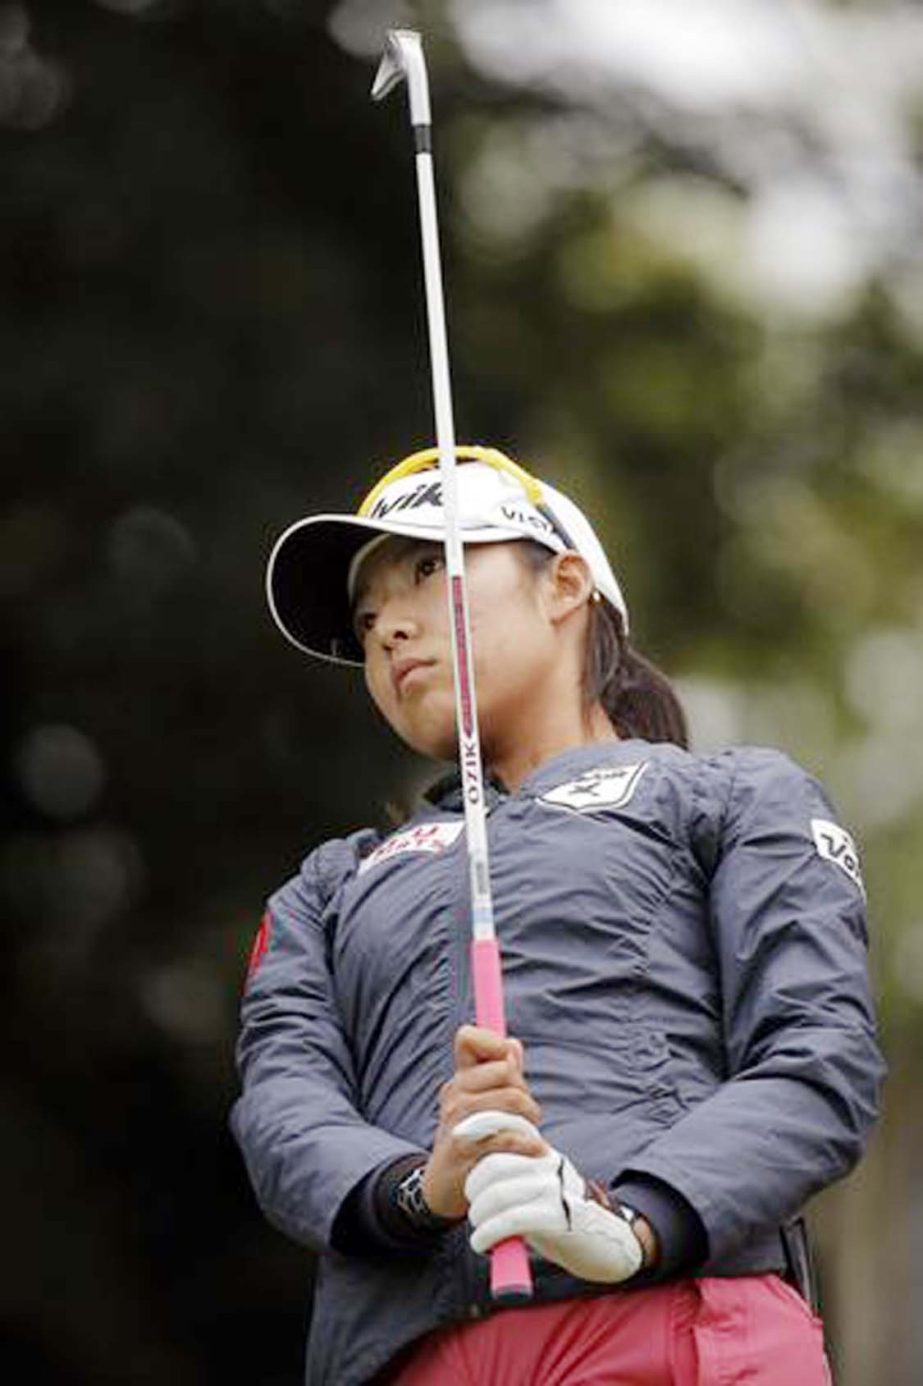 Mi Hyang Lee of South Korea studies the second hole during the second round of the Evian Championship women's golf tournament in Evian, eastern France on Friday.